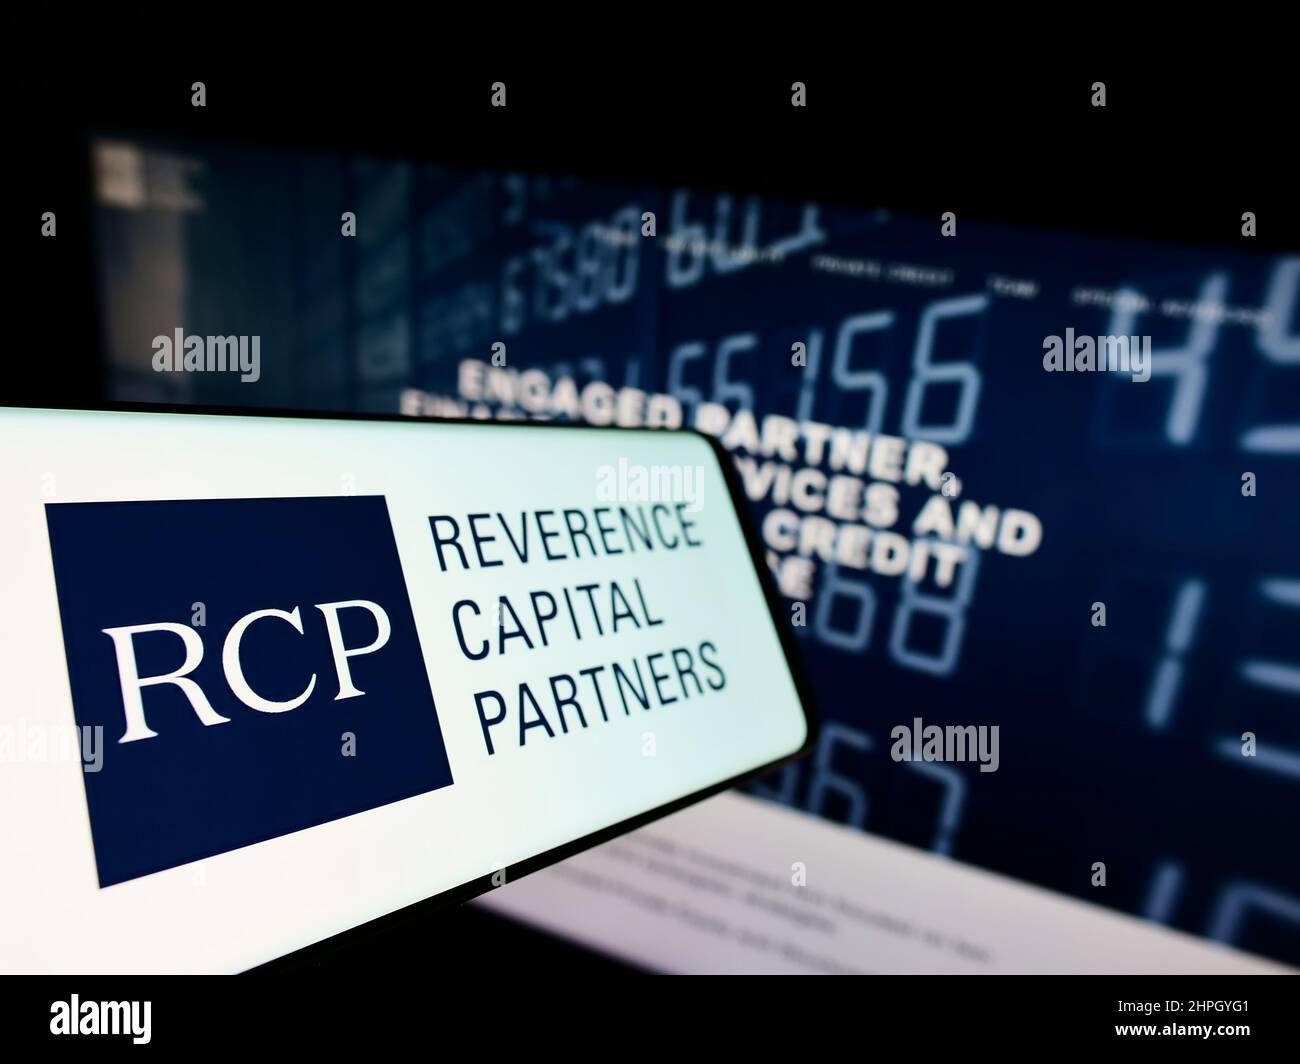 Mobile phone with logo of American company Reverence Capital Partners L.P. (RCP) on screen in front of website. Focus on left of phone display. Stock Photo